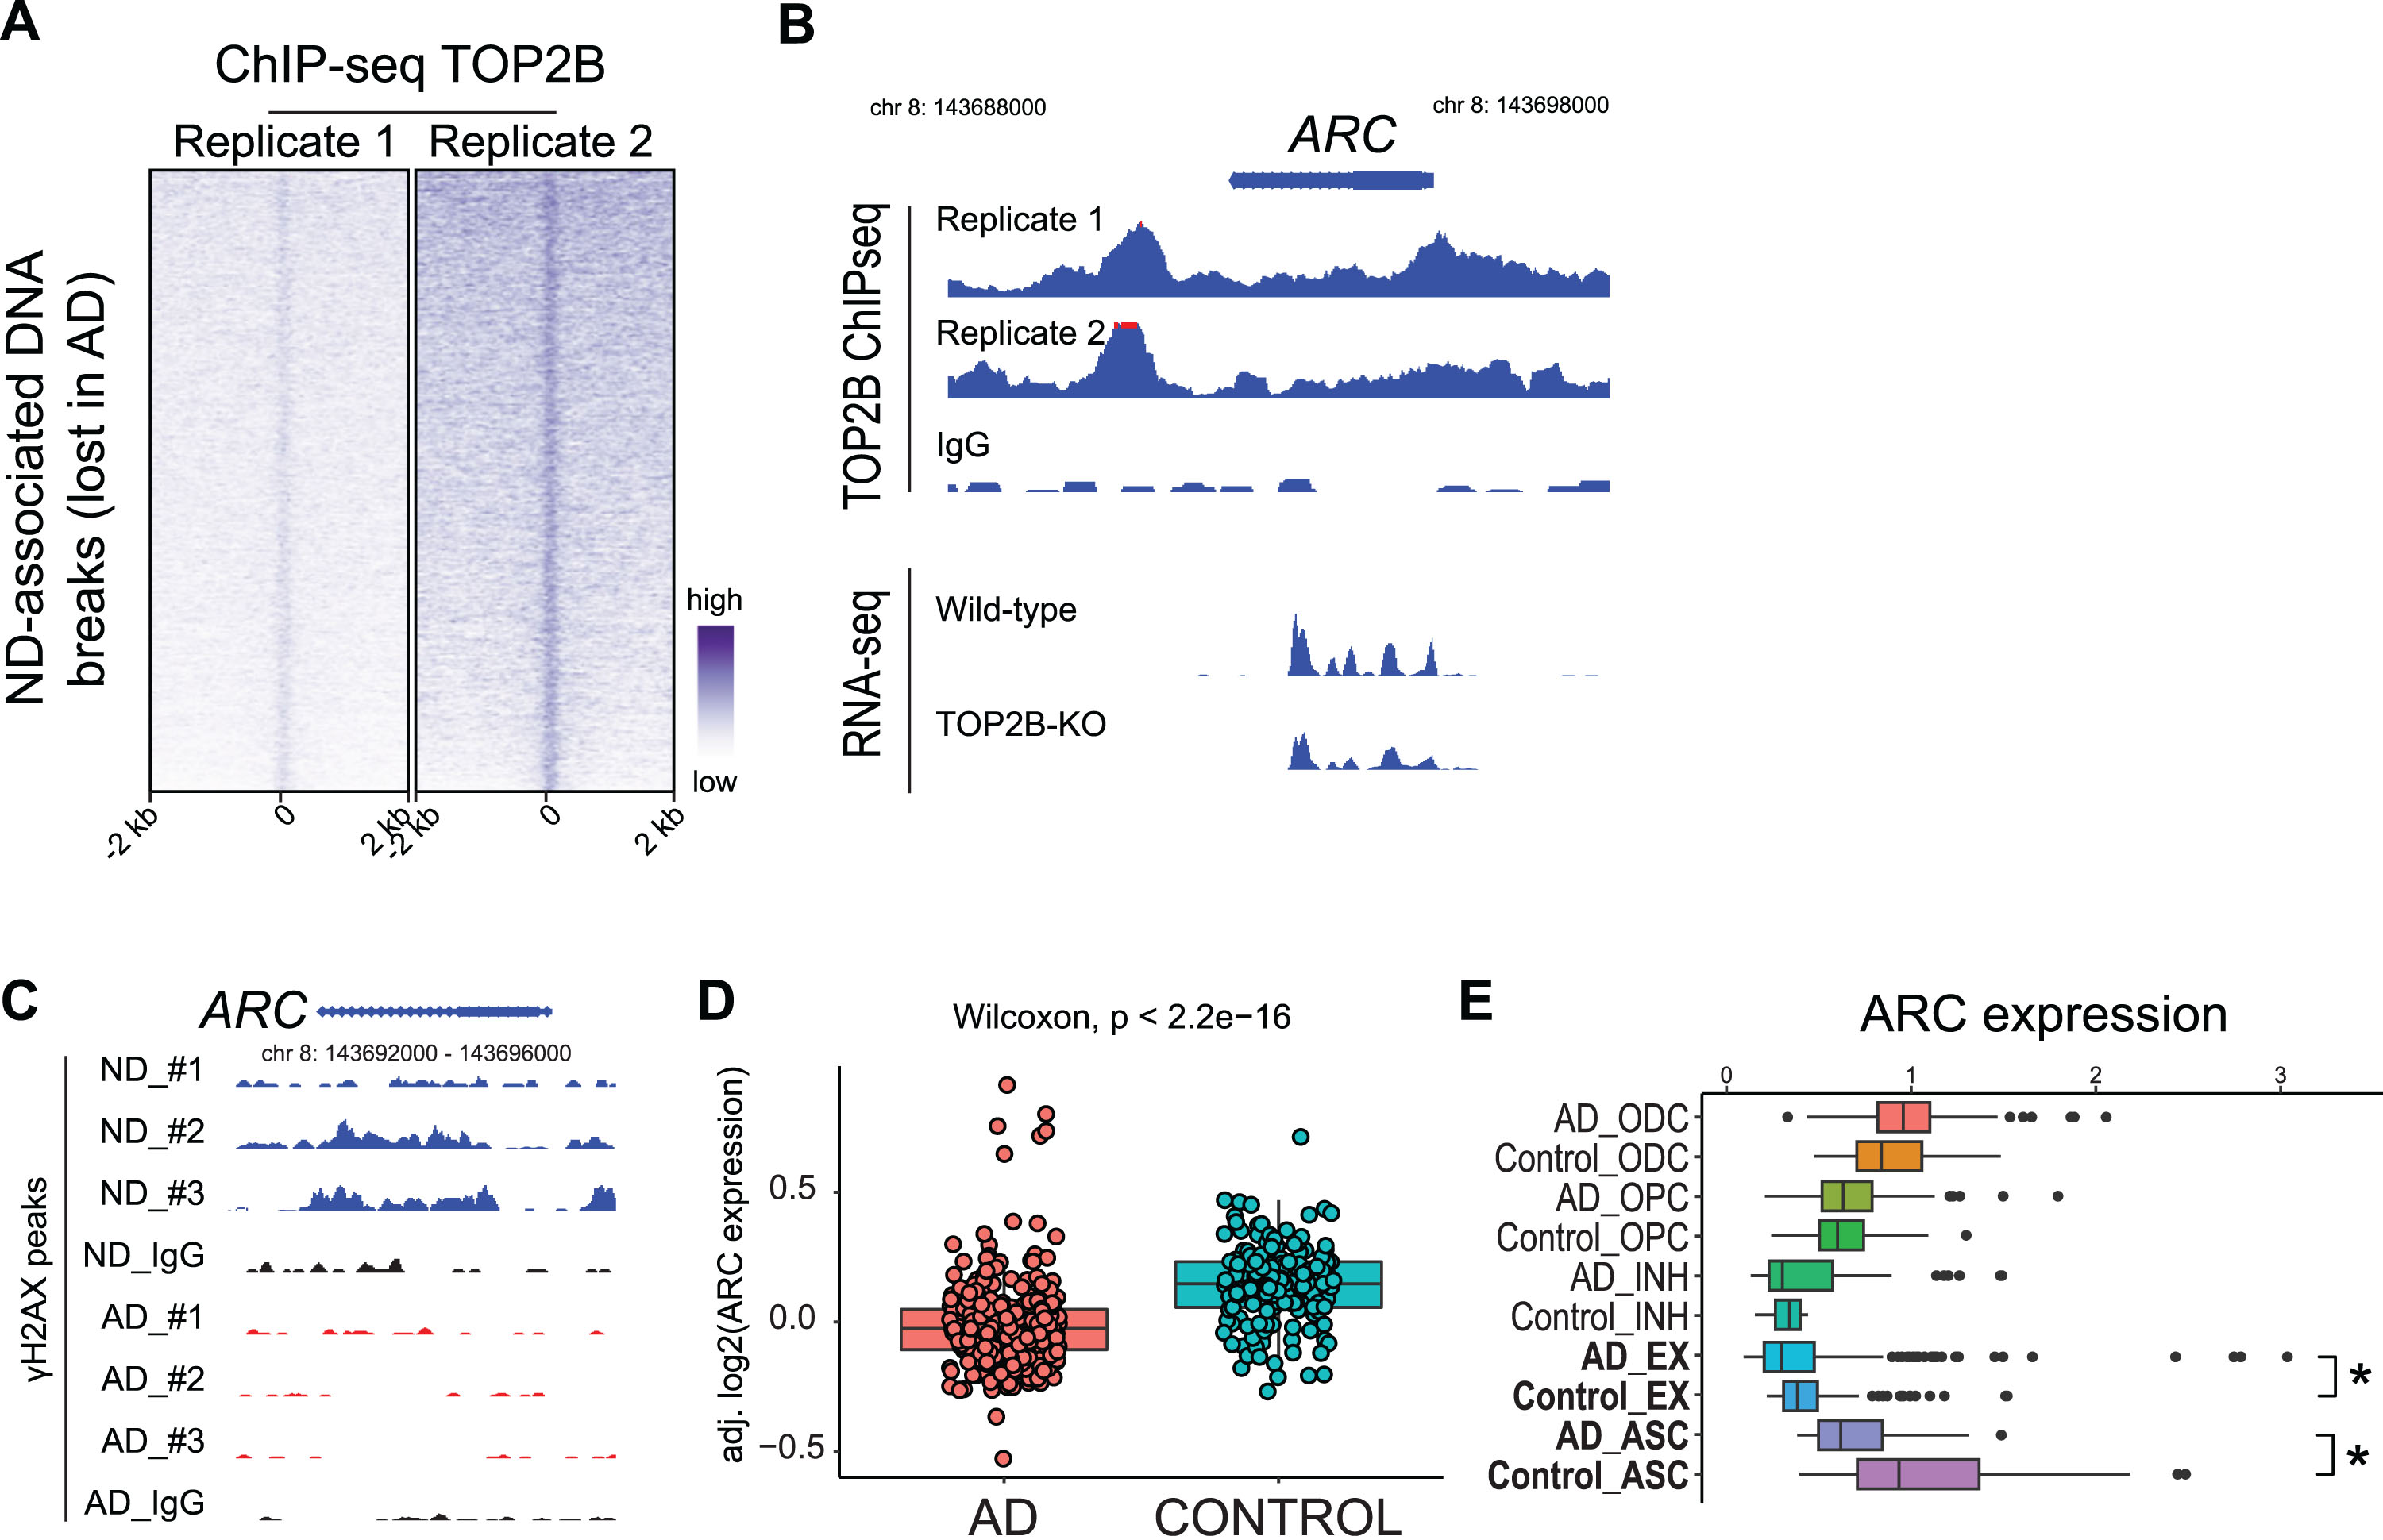 Functioning ND DNA breaks (lost in AD) are TOP2B target genes. A) Heatmap of TOP2B ChIP-seq. B) Genome track for the ARC gene in TOP2B ChIP-seq and RNA-seq in WT and TOP2B-deficient SH-SY5Y cells. C) Genome track for the ARC gene in ND and AD samples in γH2AX CUT&RUN. D) ARC expression is decreased in AD in a published RNA-seq dataset. E) scRNA-seq: ARC expression is downregulated in AD EX neurons. *p < 0.05.